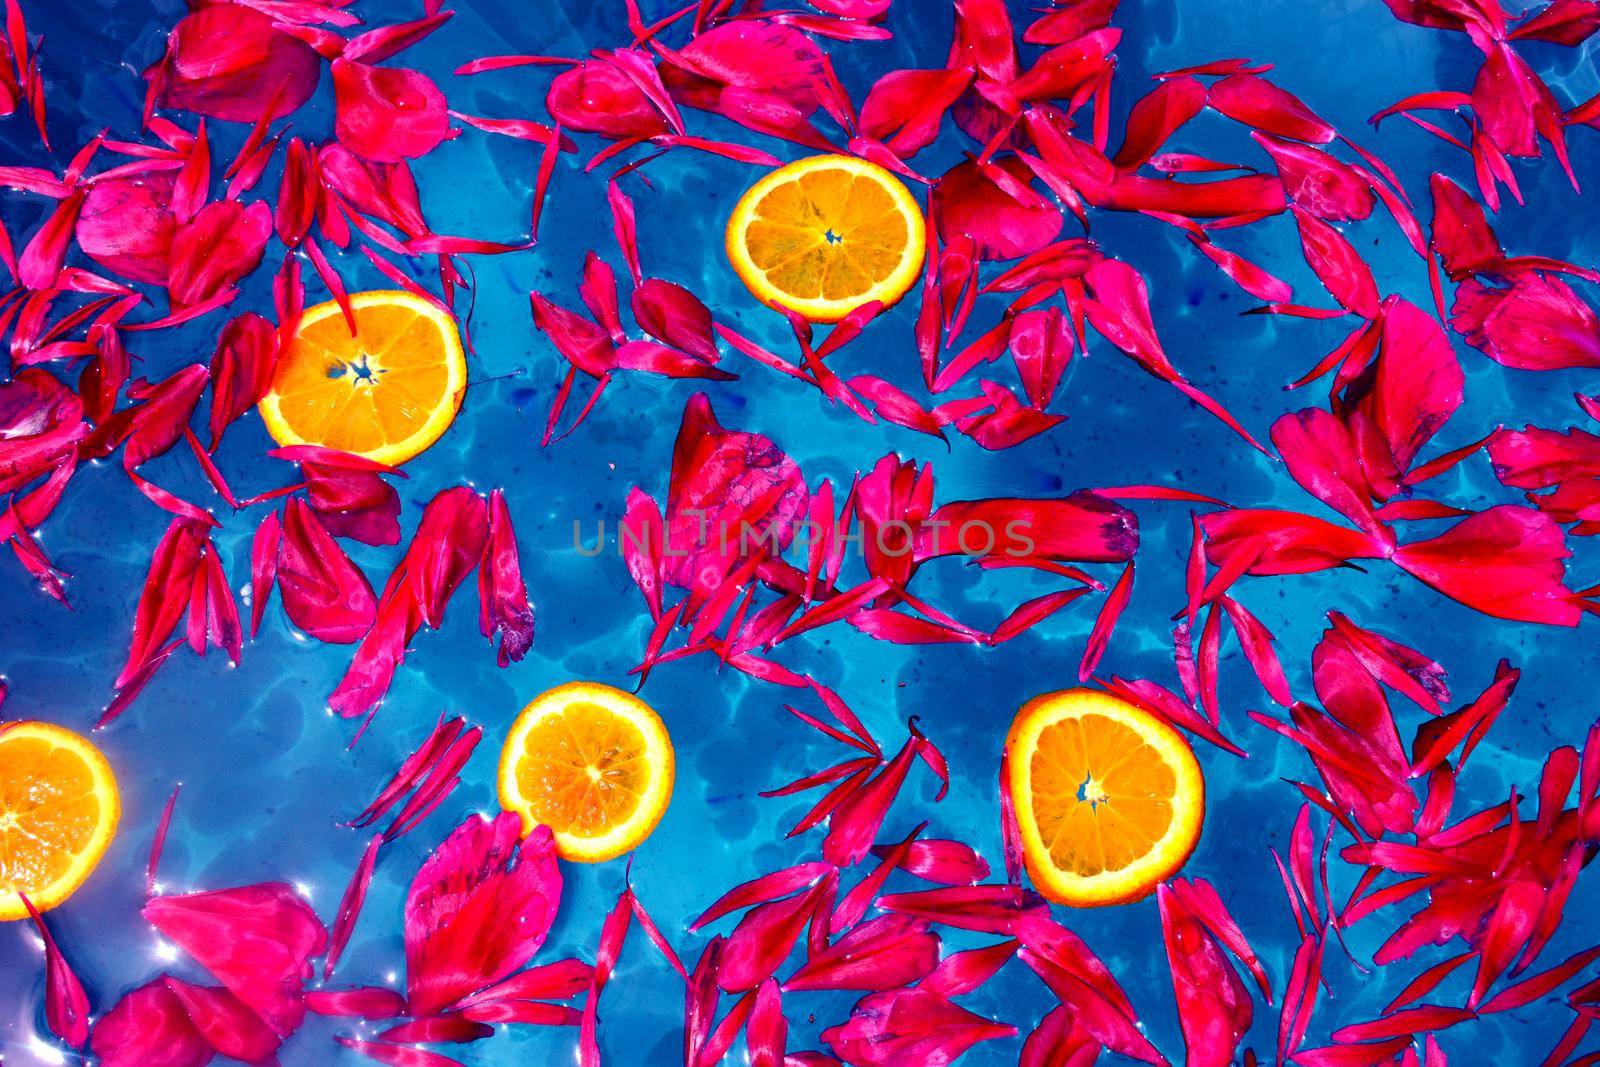 Red petals and orange slices floating on blue water by hibrida13